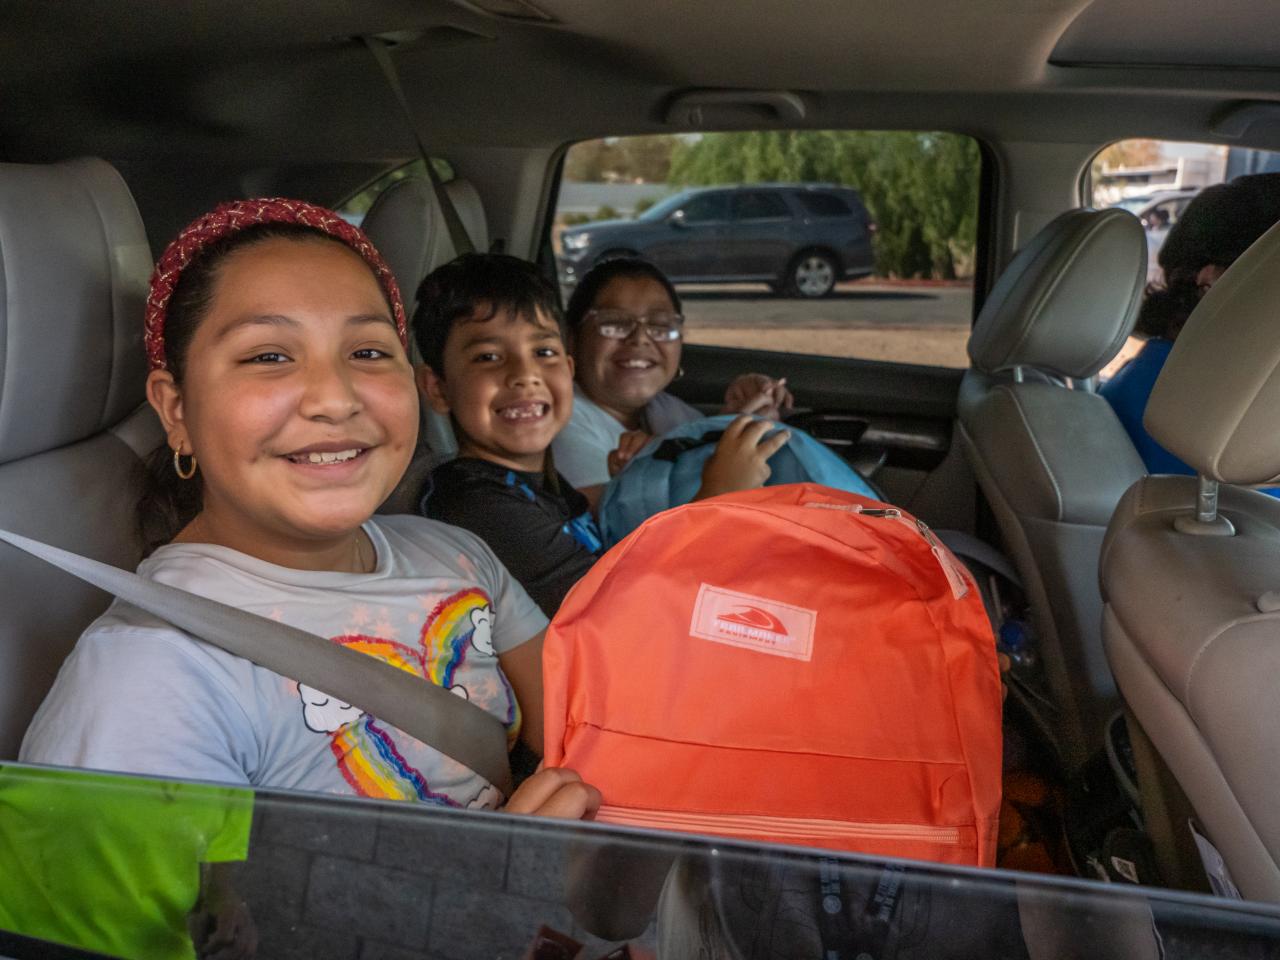 A car's backseat with three kids, each holding a new backpack given to them from SVdP.